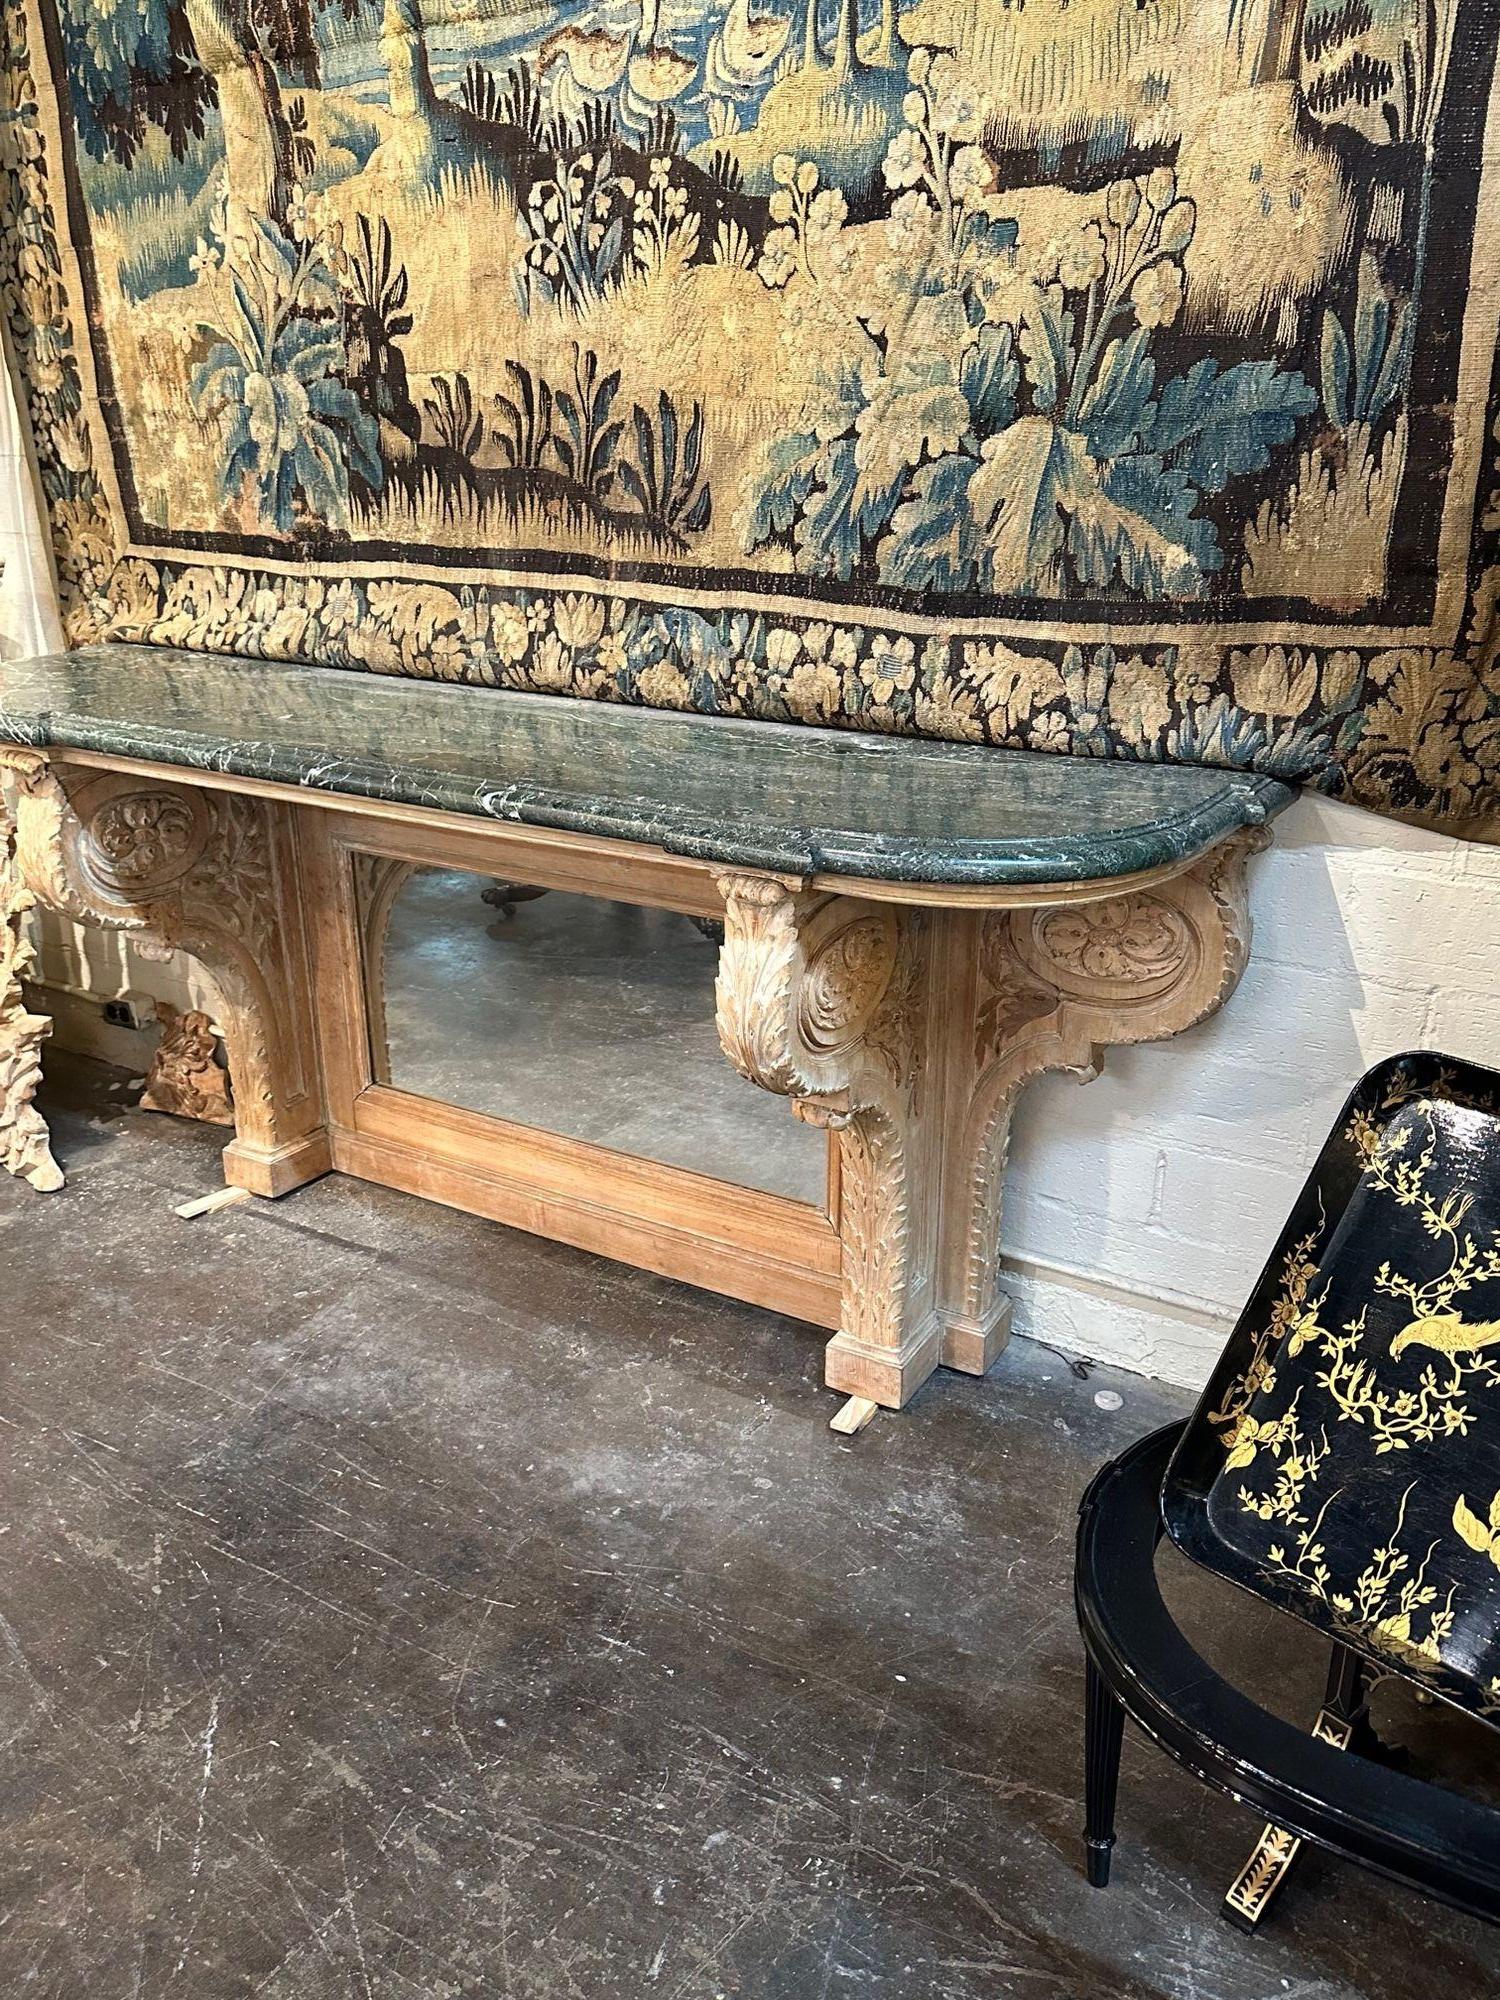 Vintage French Jansen carved and stripped pine marble top console, circa 1940. Adds warmth and charm to any room!